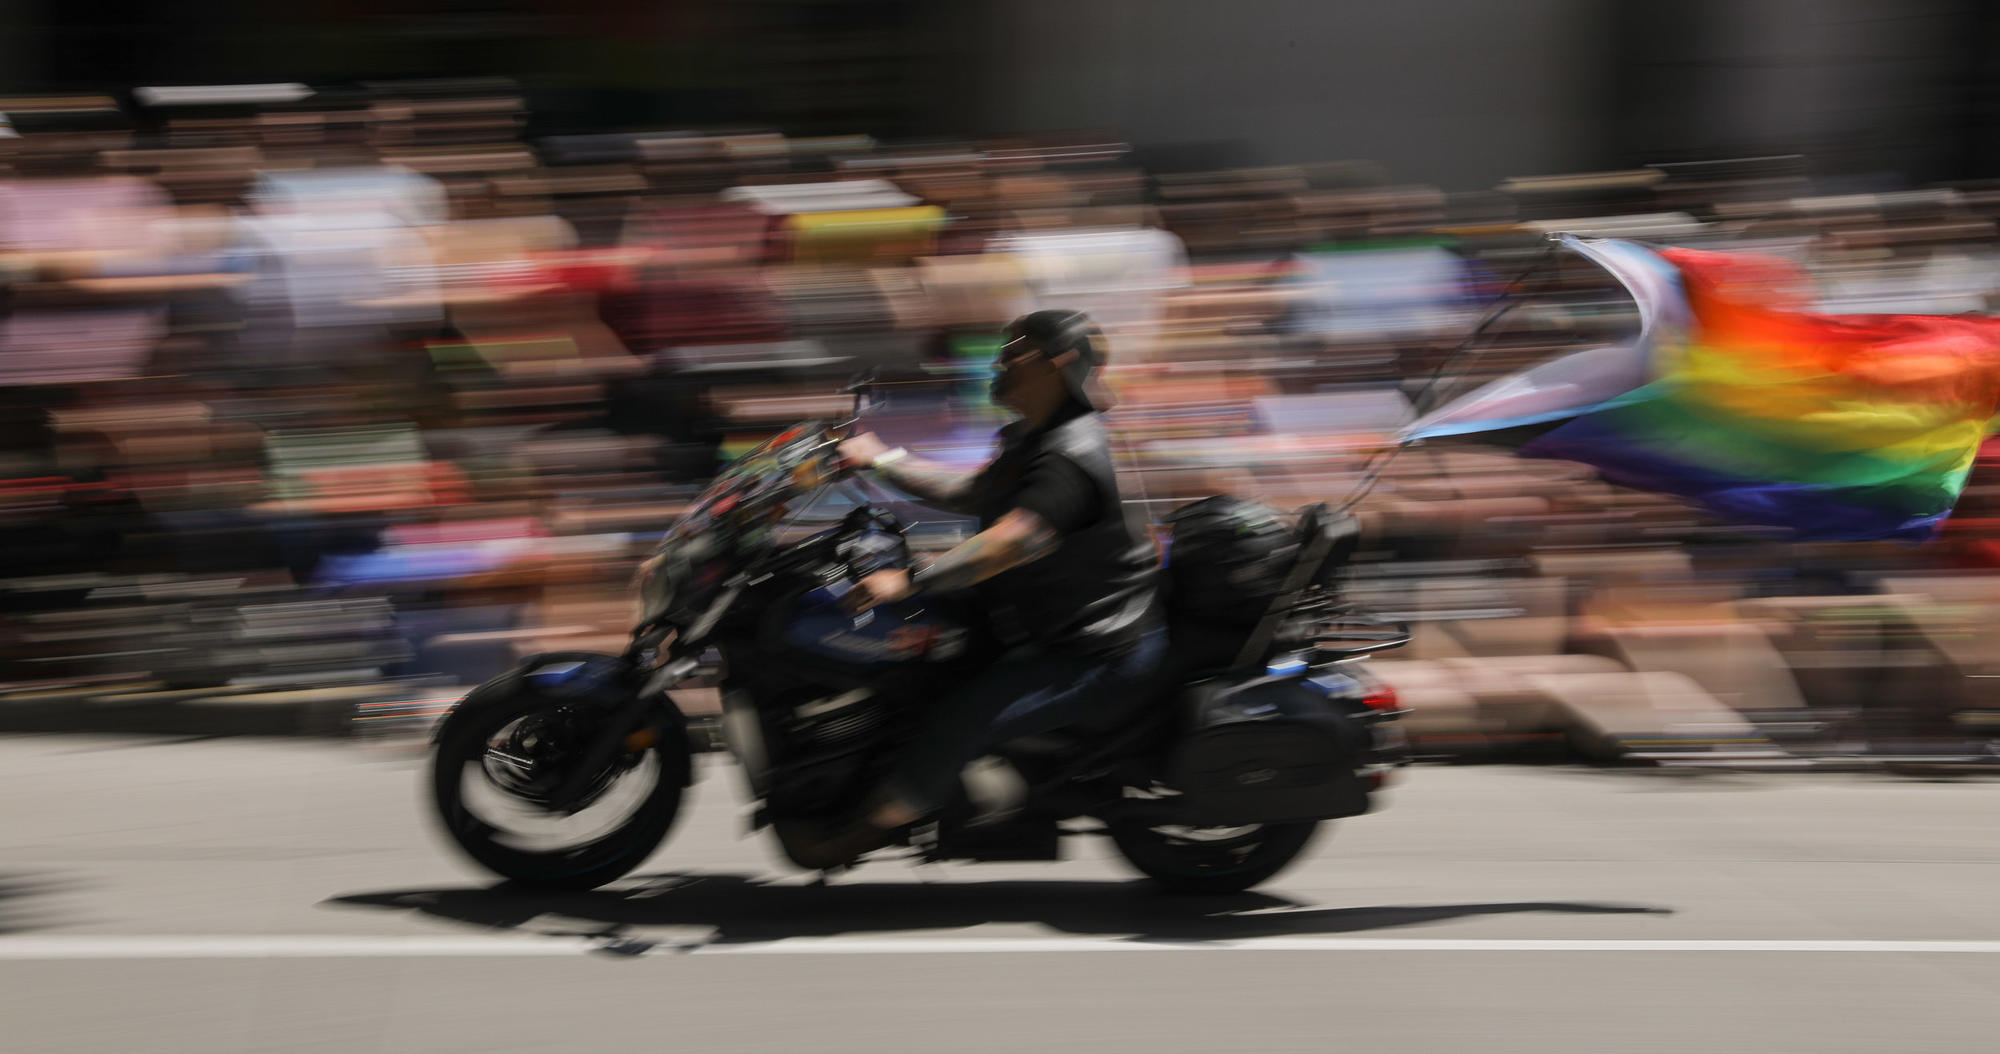 A slow shutter panning shot of a rider on a motorcycle with a rainbow Pride flag blowing behind her